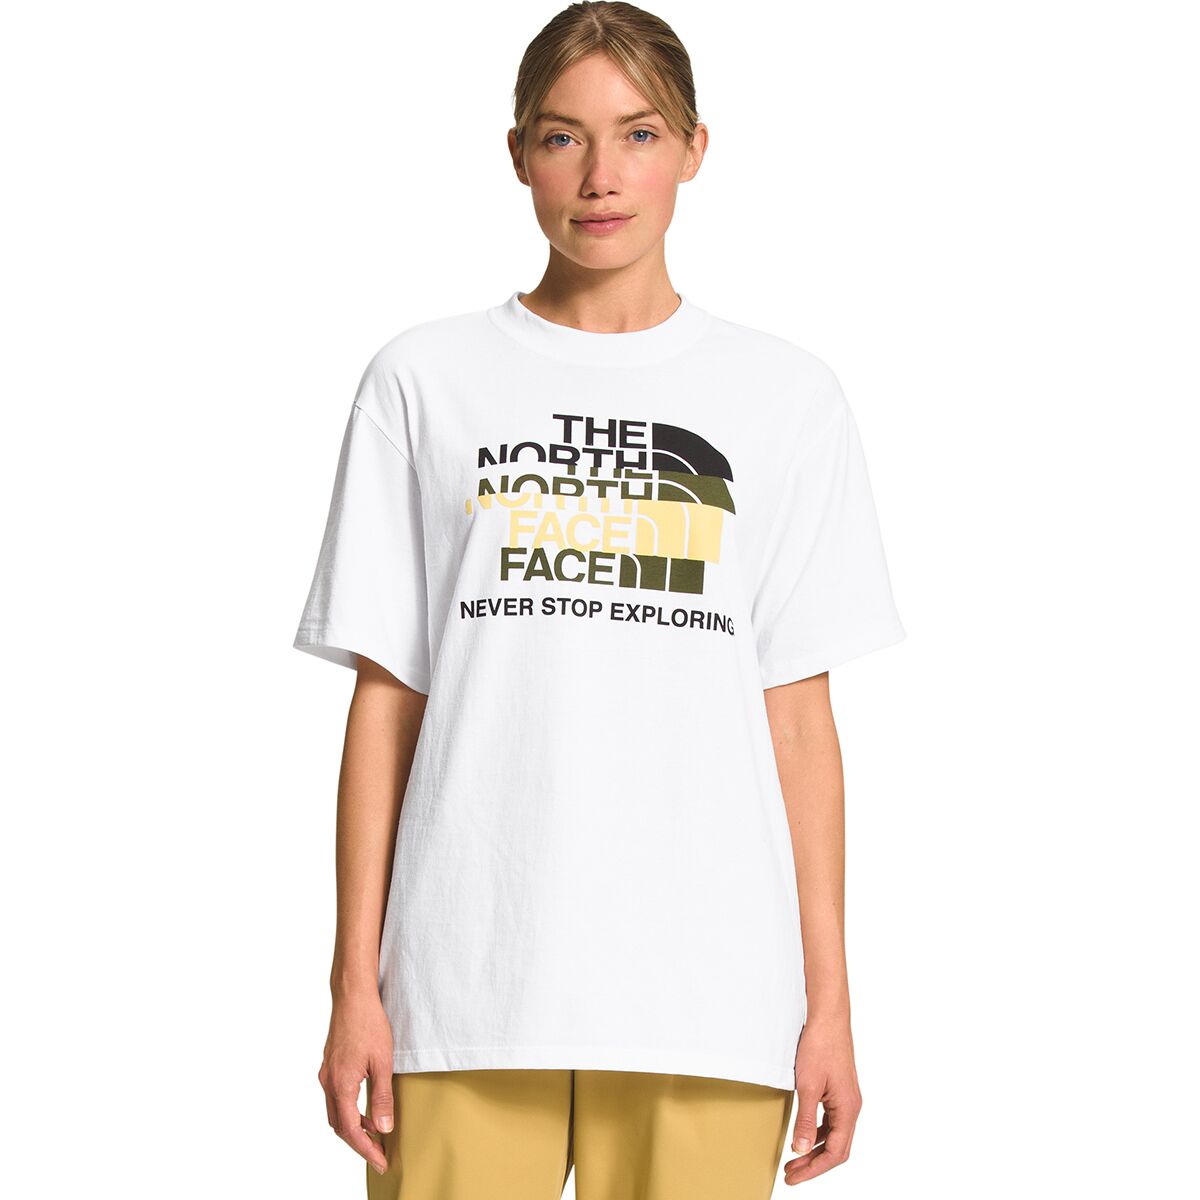 The North Face Coordinates Relaxed Short-Sleeve T-Shirt - Women's